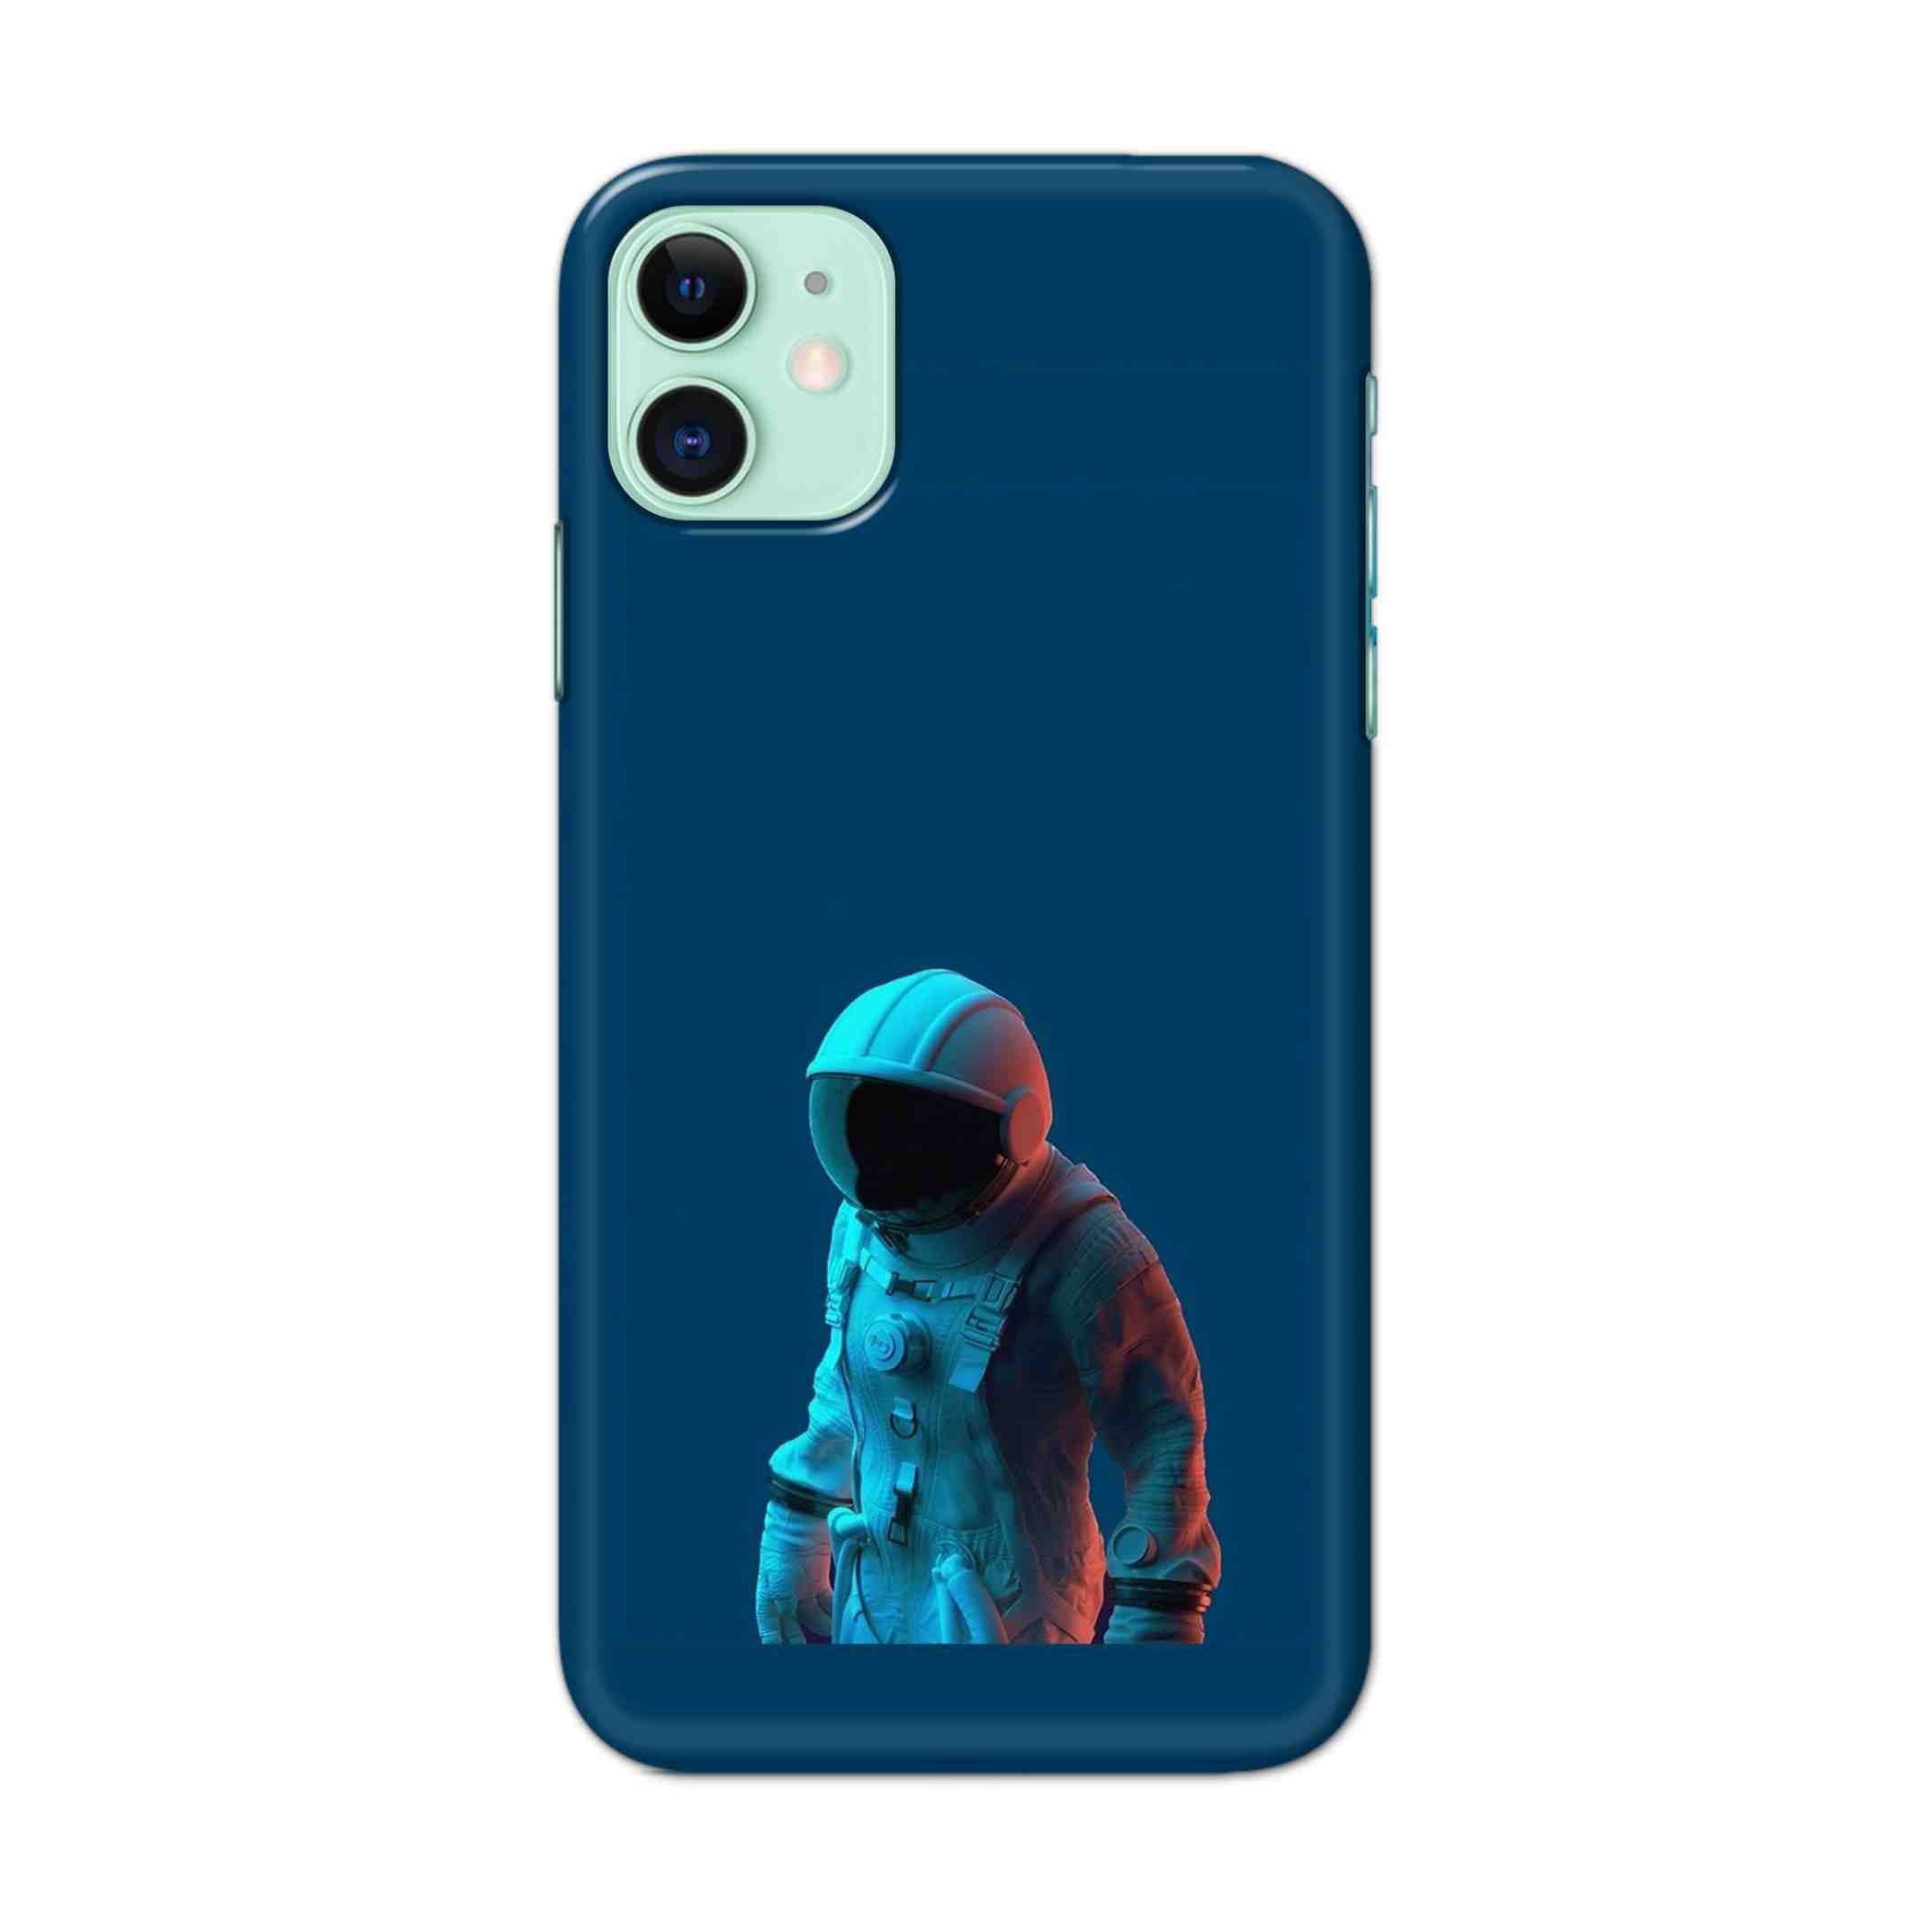 Buy Blue Astranaut Hard Back Mobile Phone Case/Cover For iPhone 11 Online